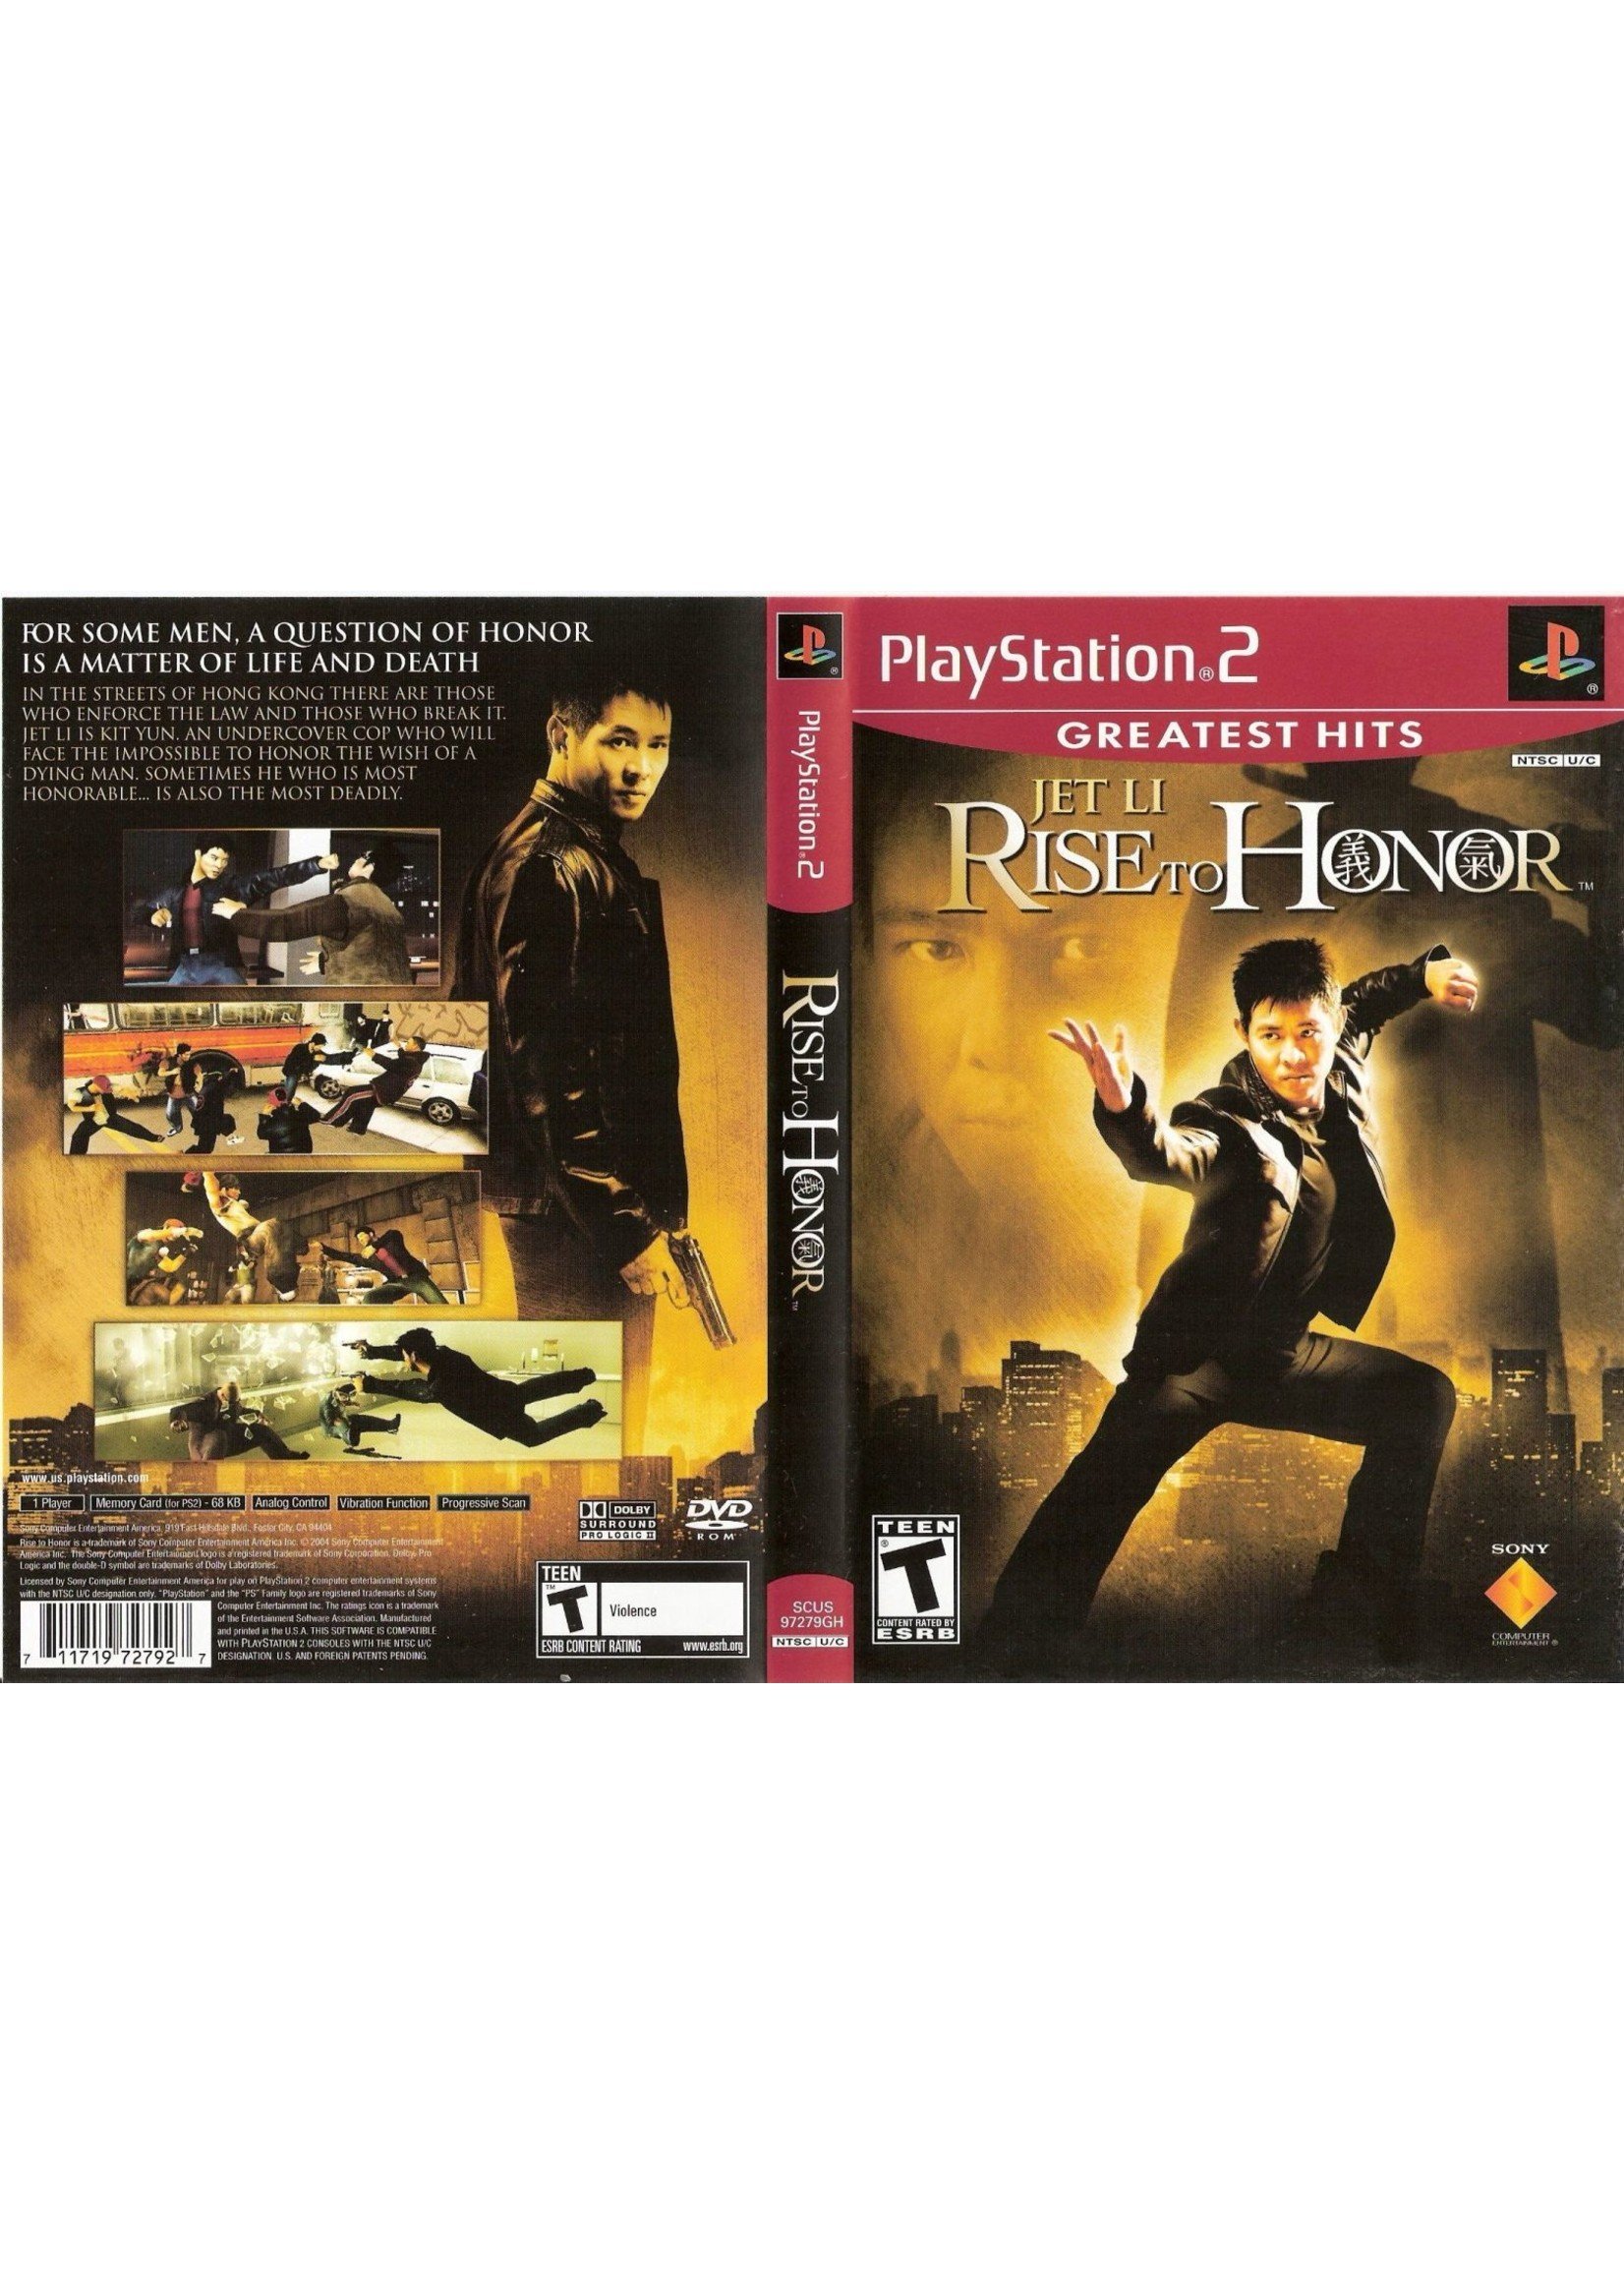 Sony Playstation 2 (PS2) Jet Li Rise to Honor